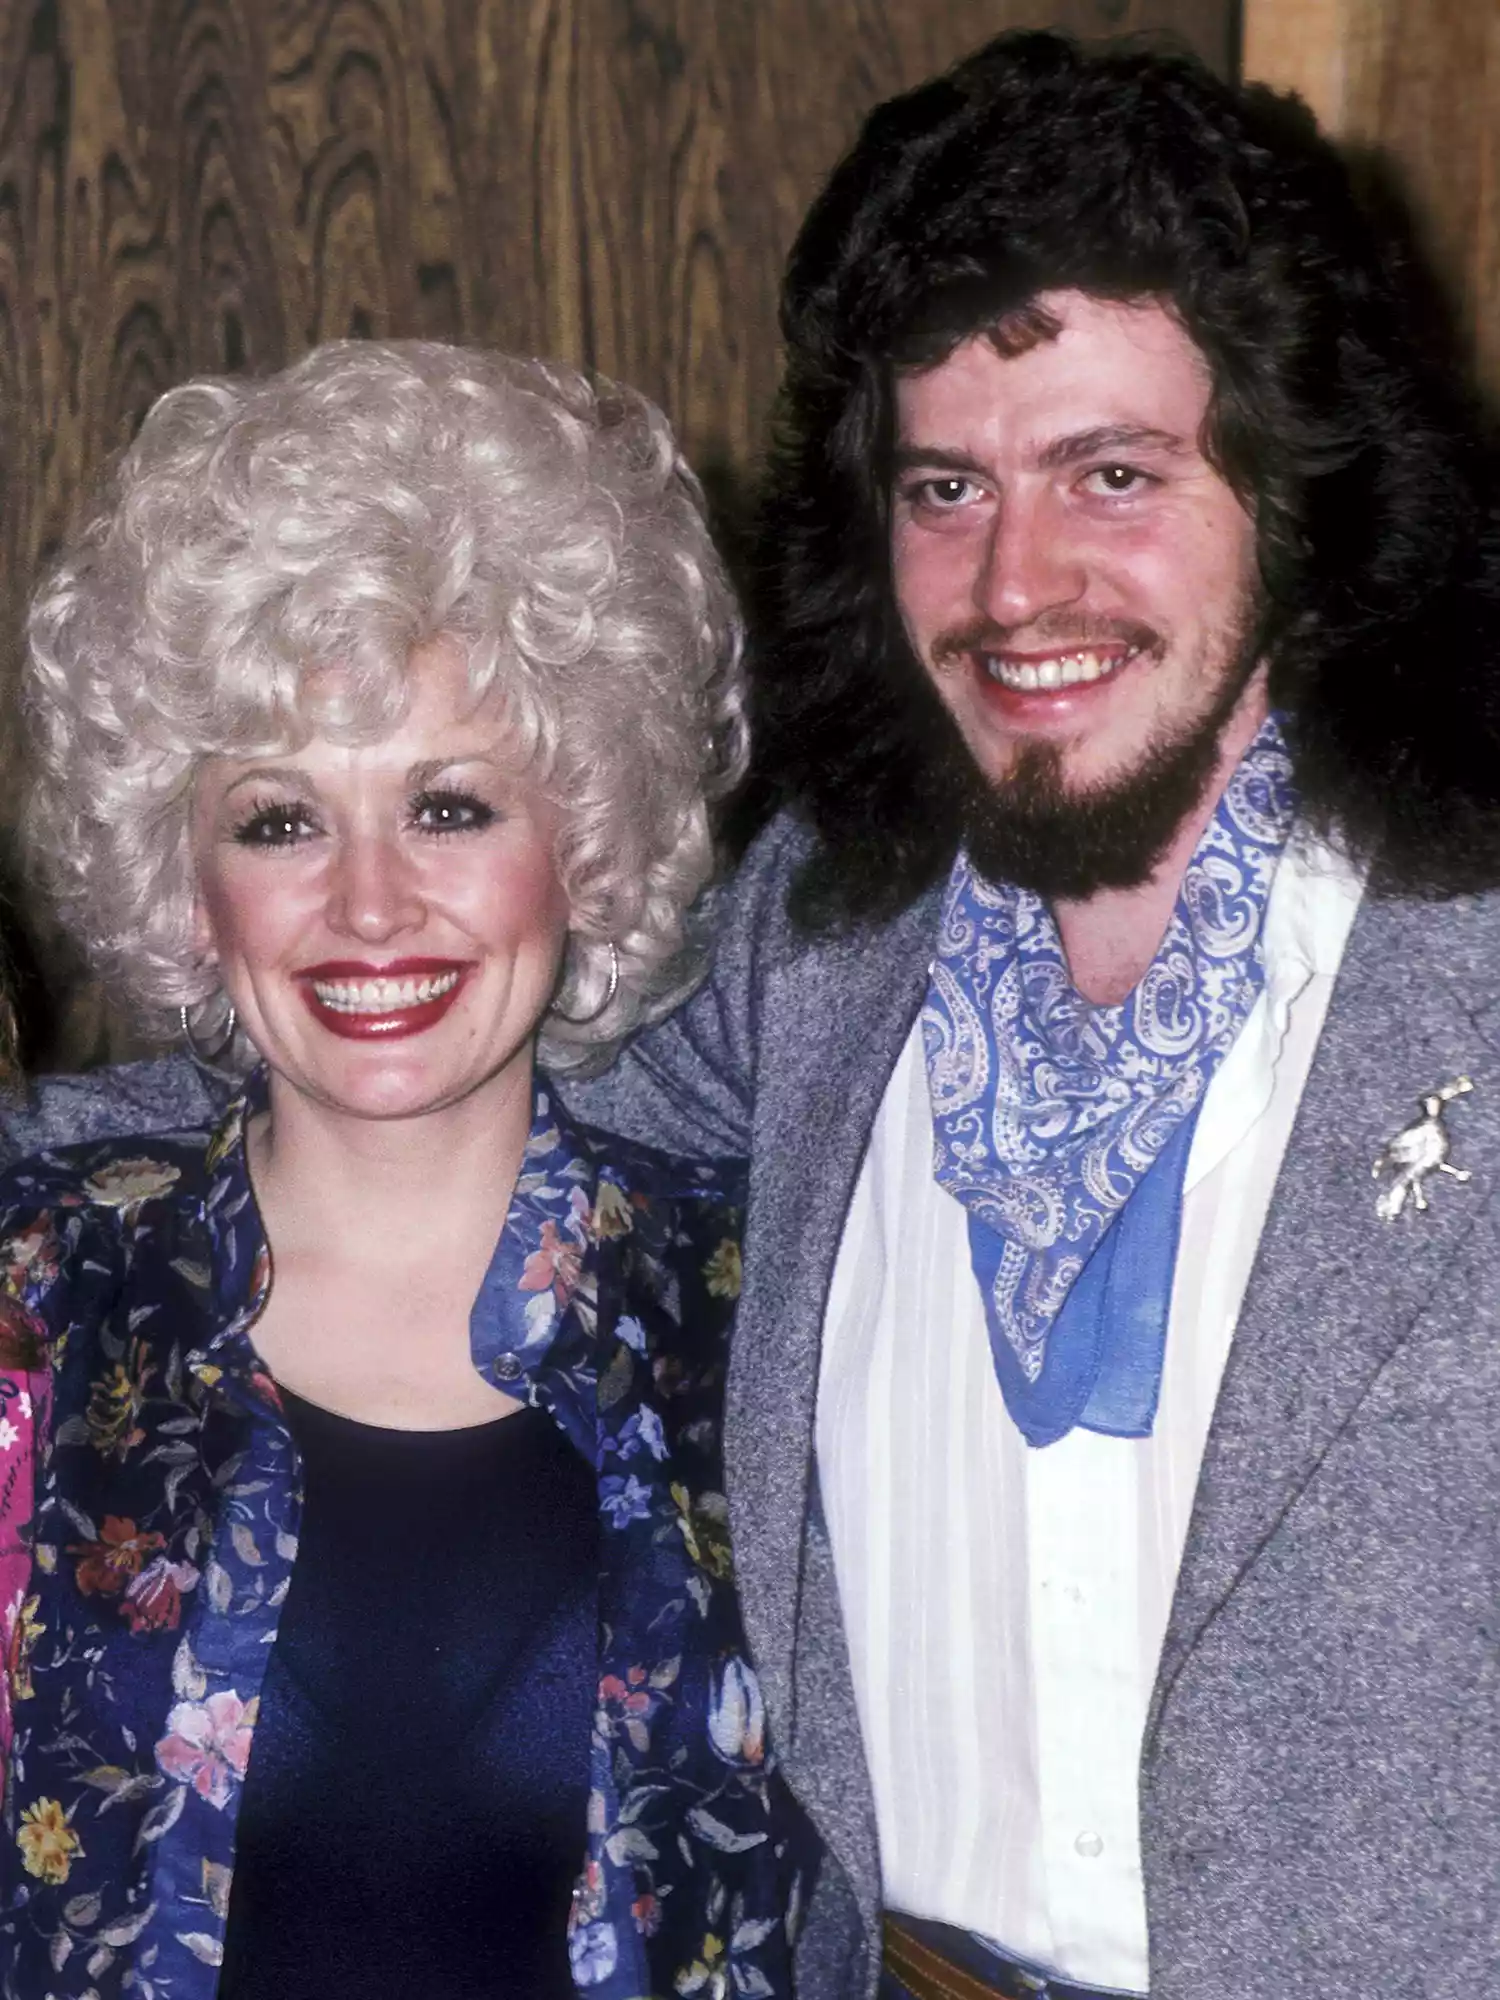 Dolly Parton with her younger brother Floyd Parton